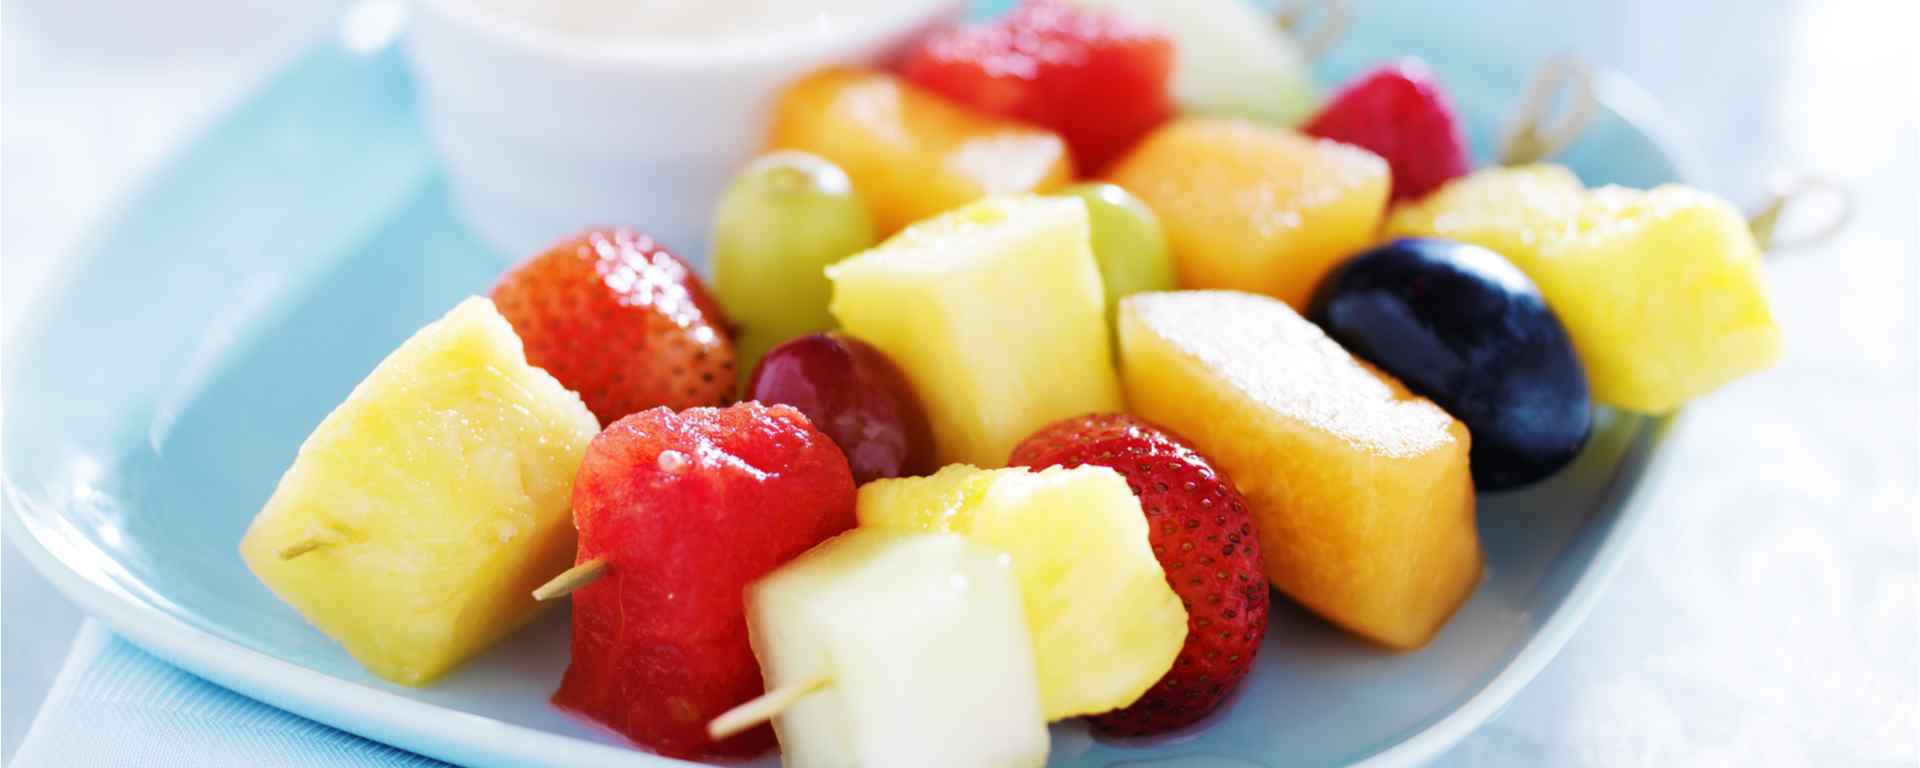 Photo for - Grilled Fruit Kabobs